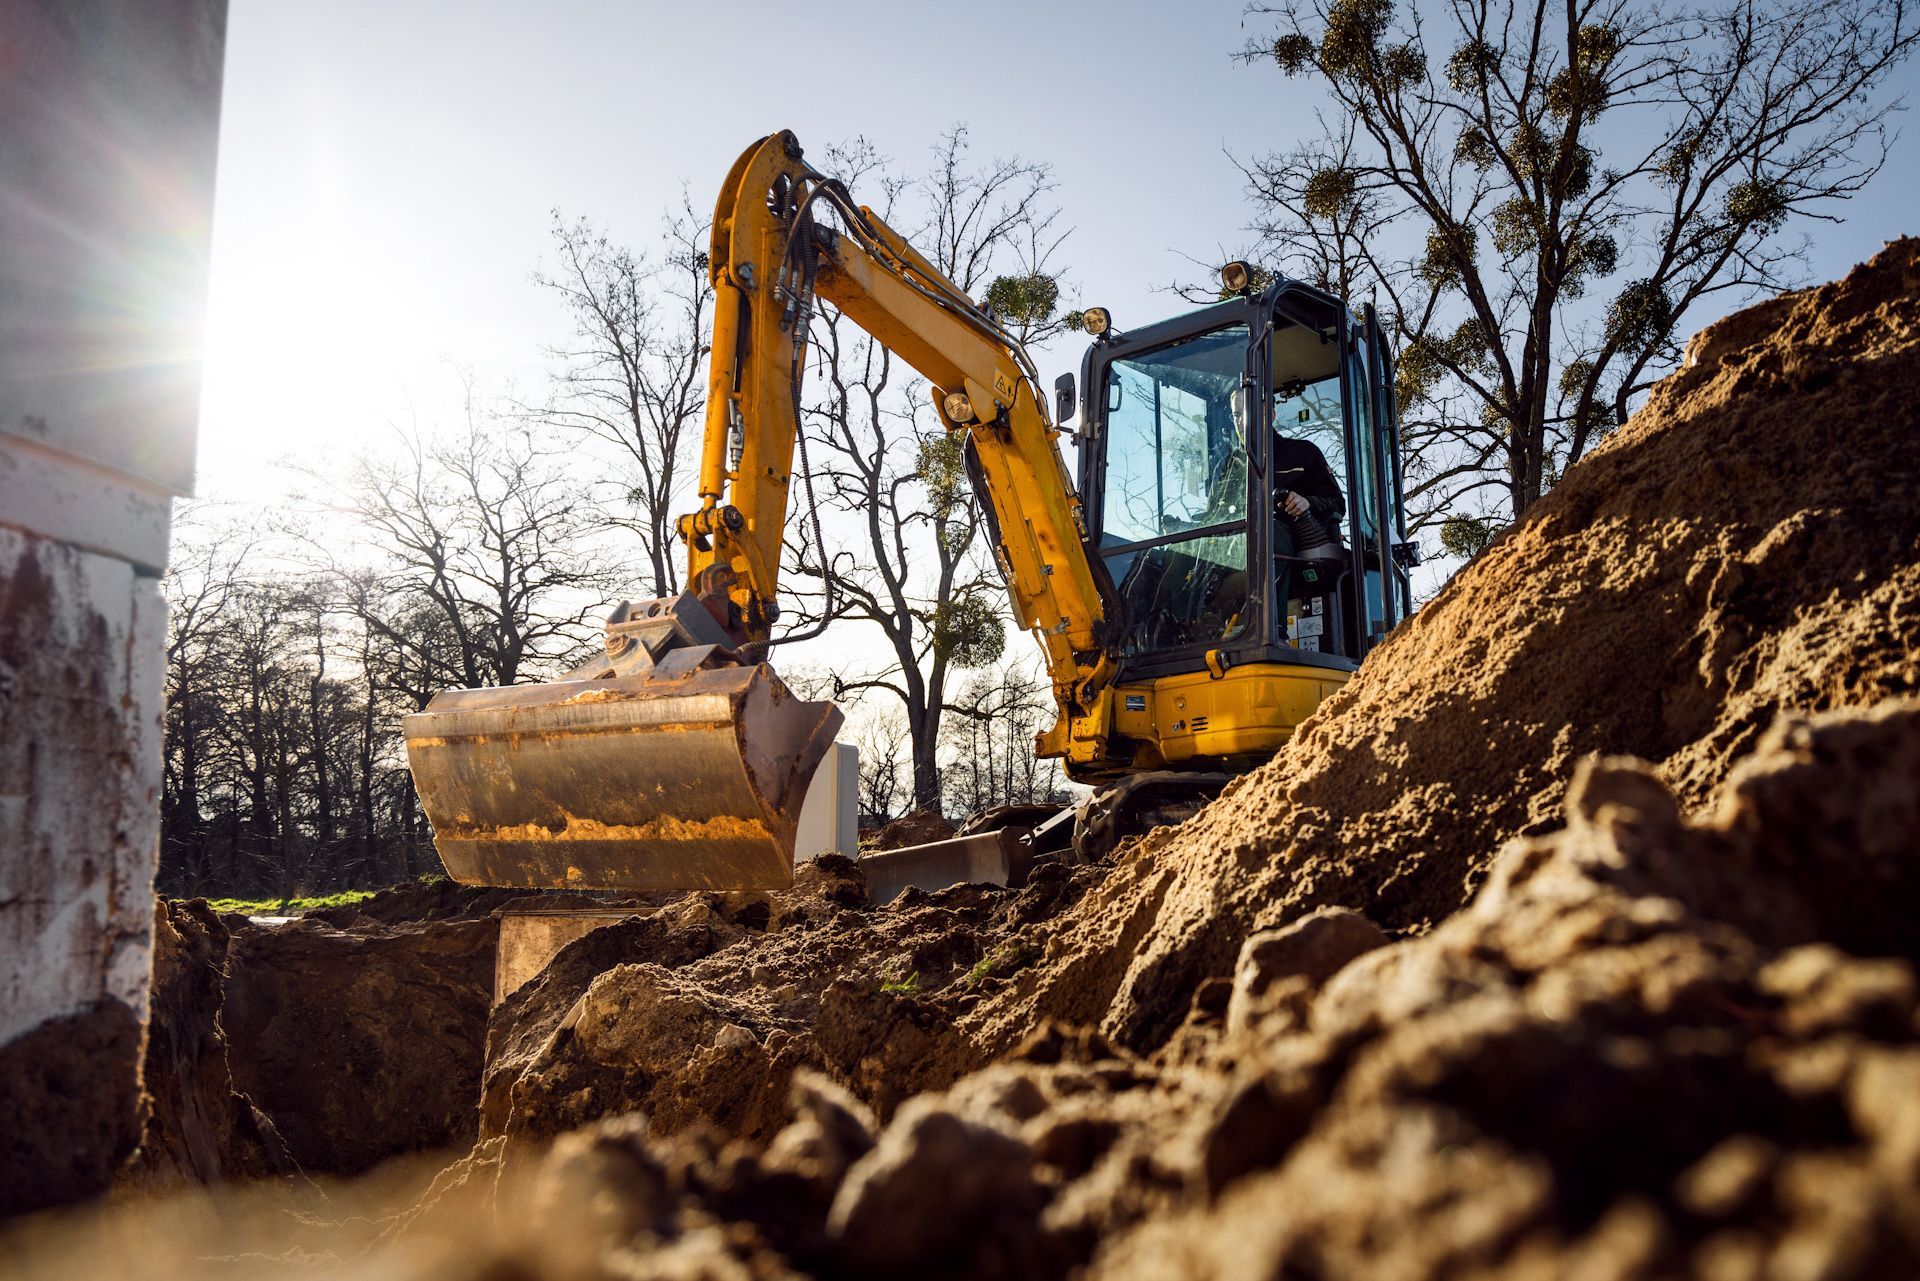 A yellow excavator is digging a hole in the dirt